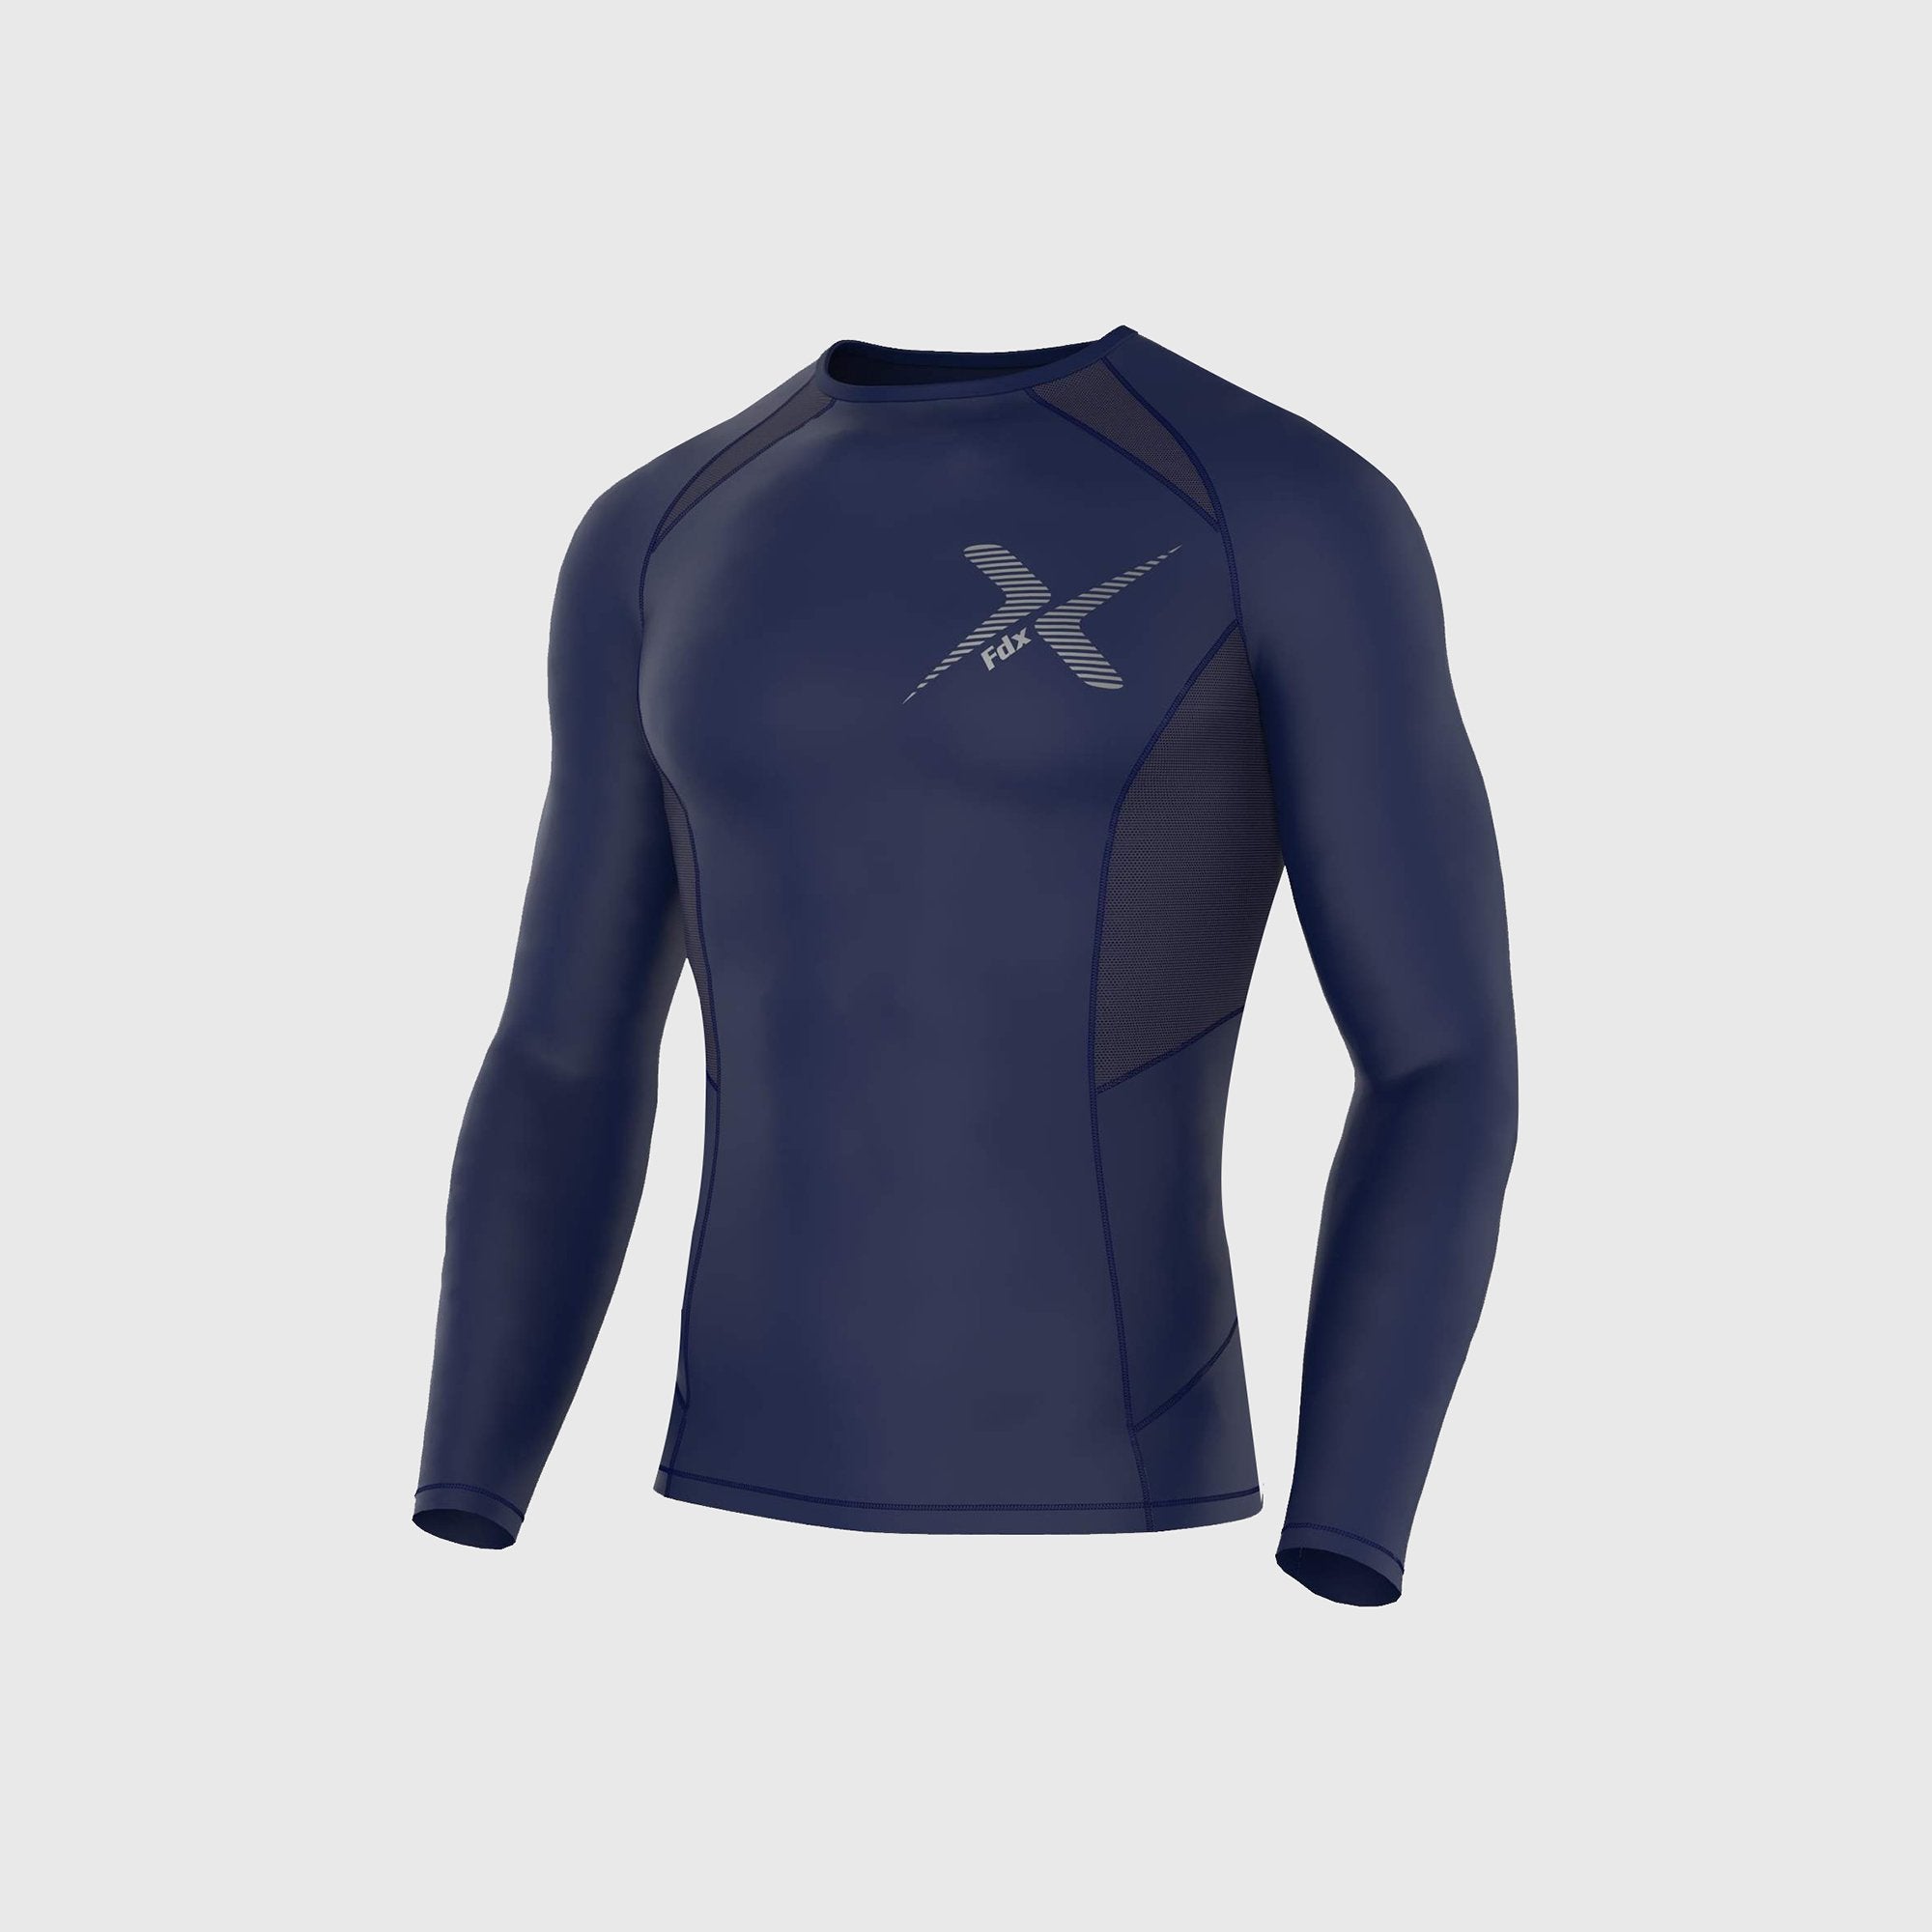 Fdx Best Men's Navy Blue Long Sleeve Compression Top Running Gym Workout Wear Rash Guard Stretchable Breathable - Recoil